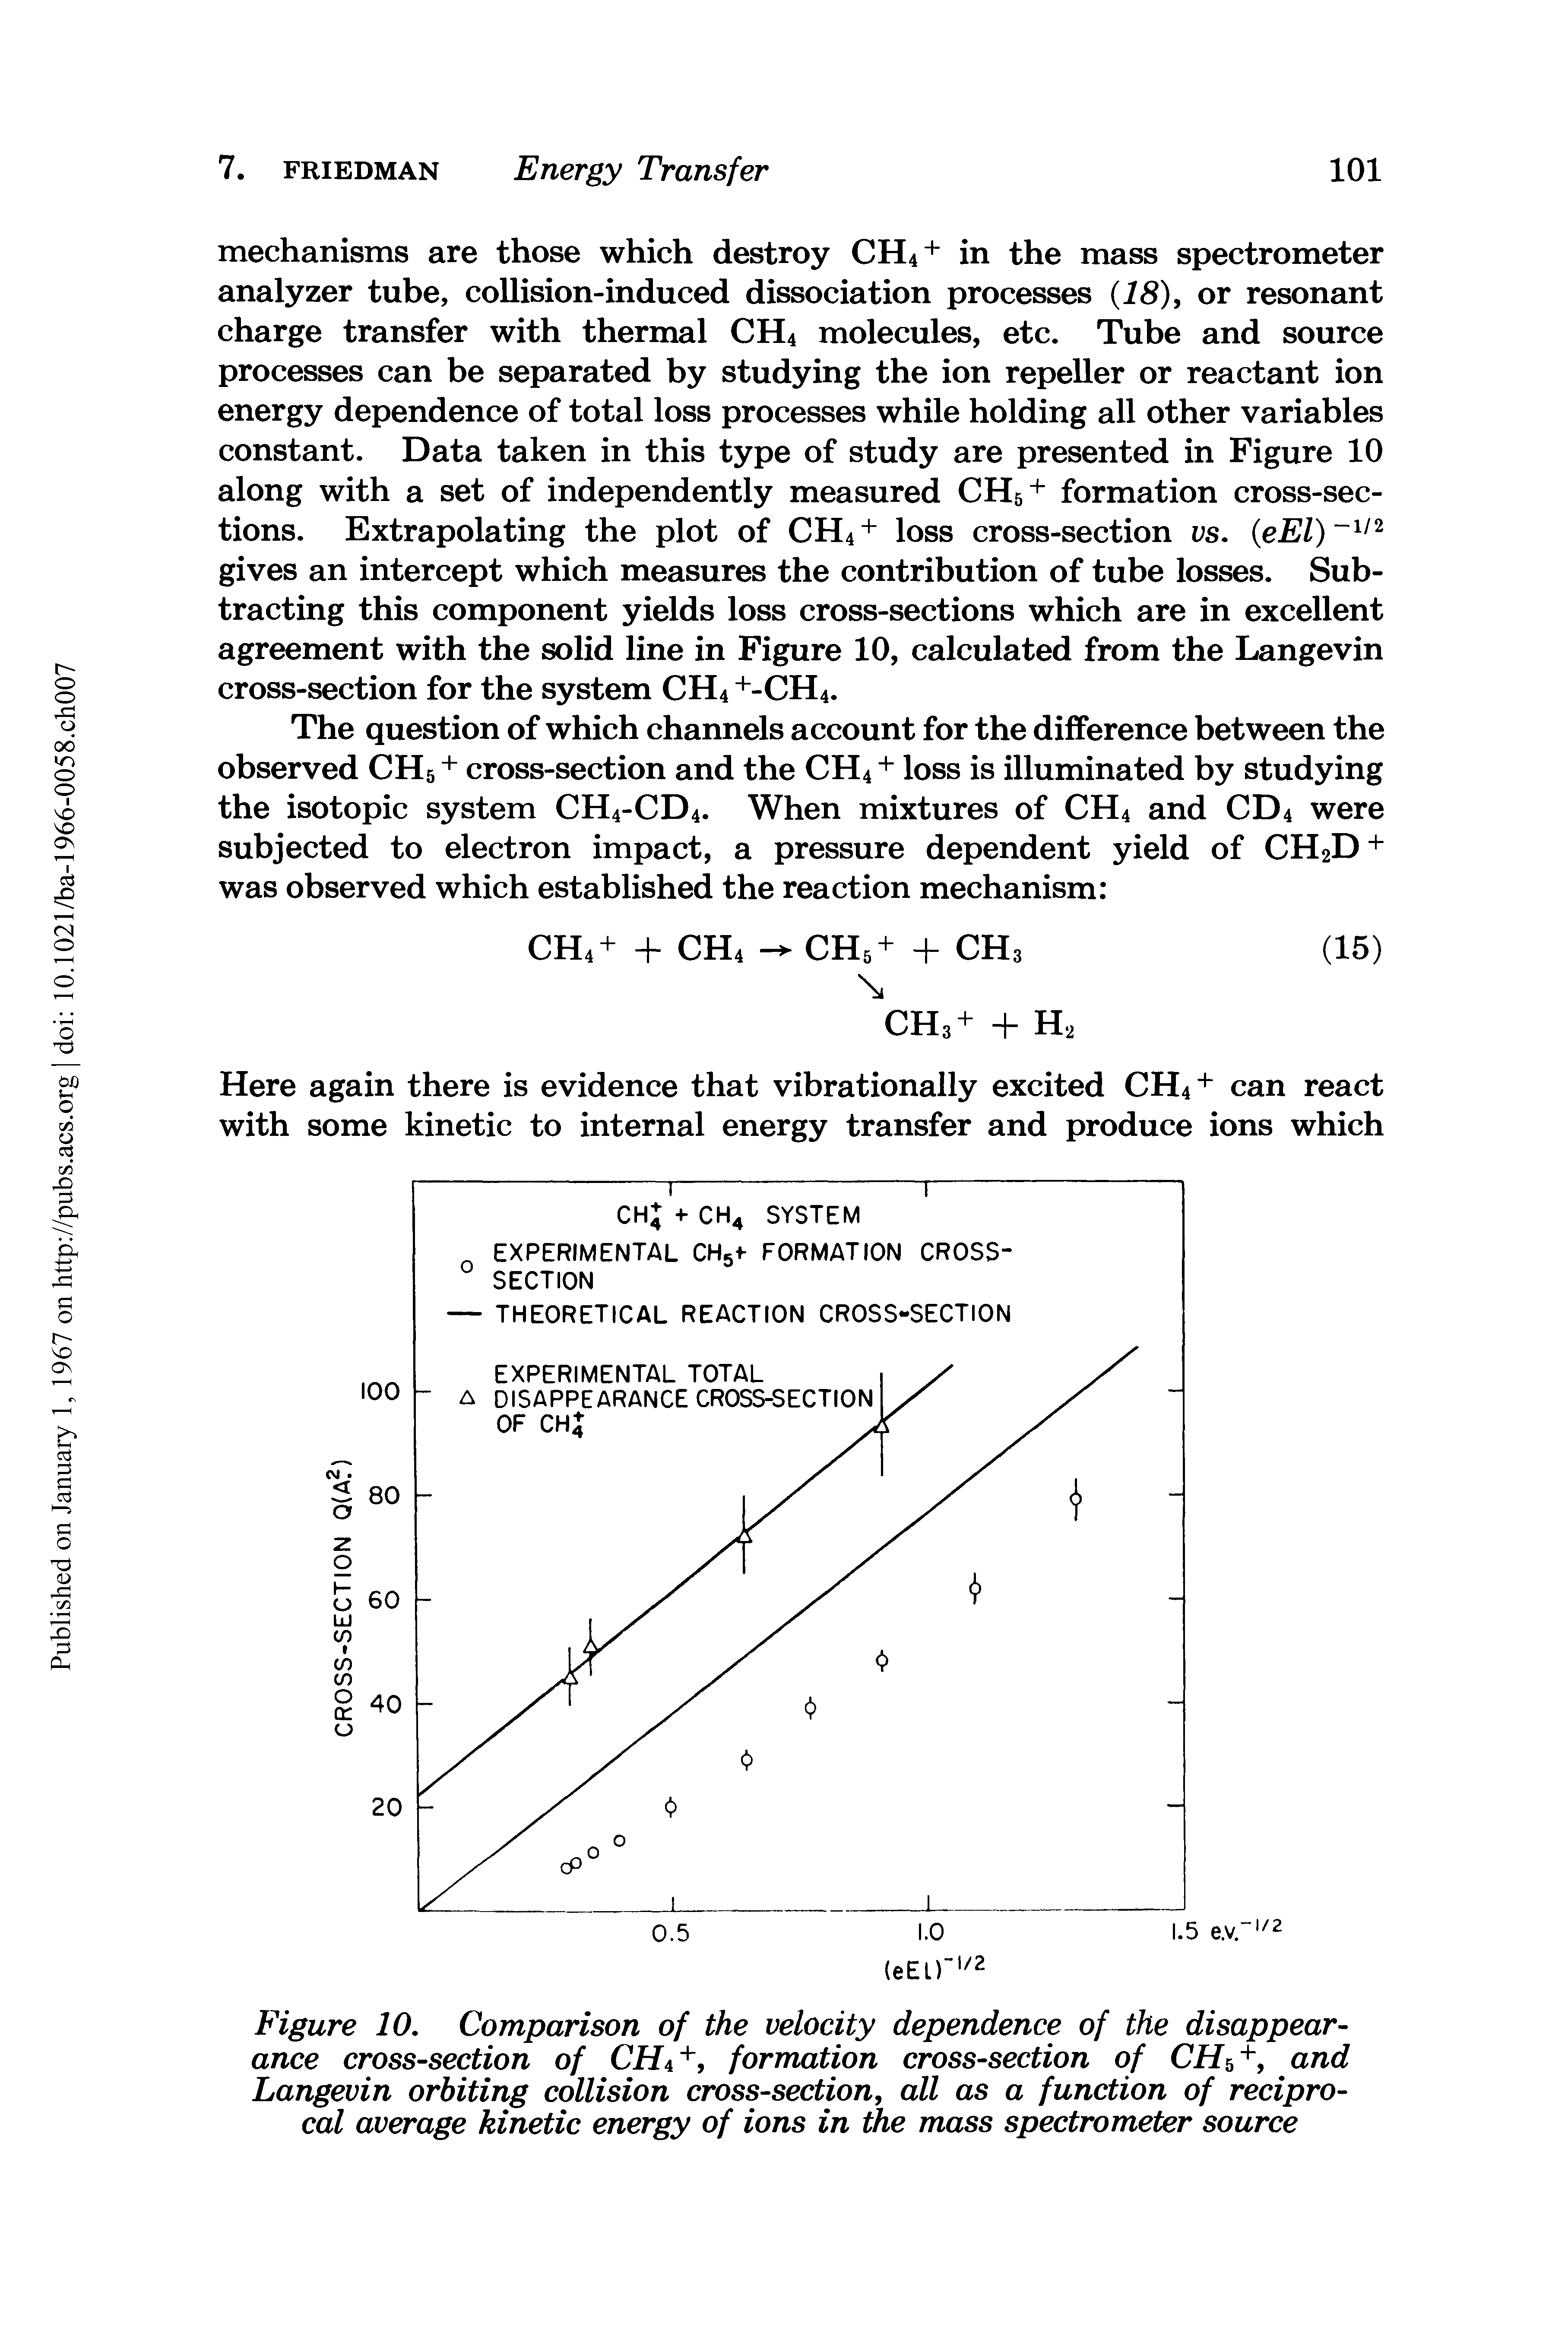 Figure 10. Comparison of the velocity dependence of the disappearance cross-section of CHa+, formation cross-section of CH0 +, and Langevin orbiting collision cross-section, all as a function of reciprocal average kinetic energy of ions in the mass spectrometer source...